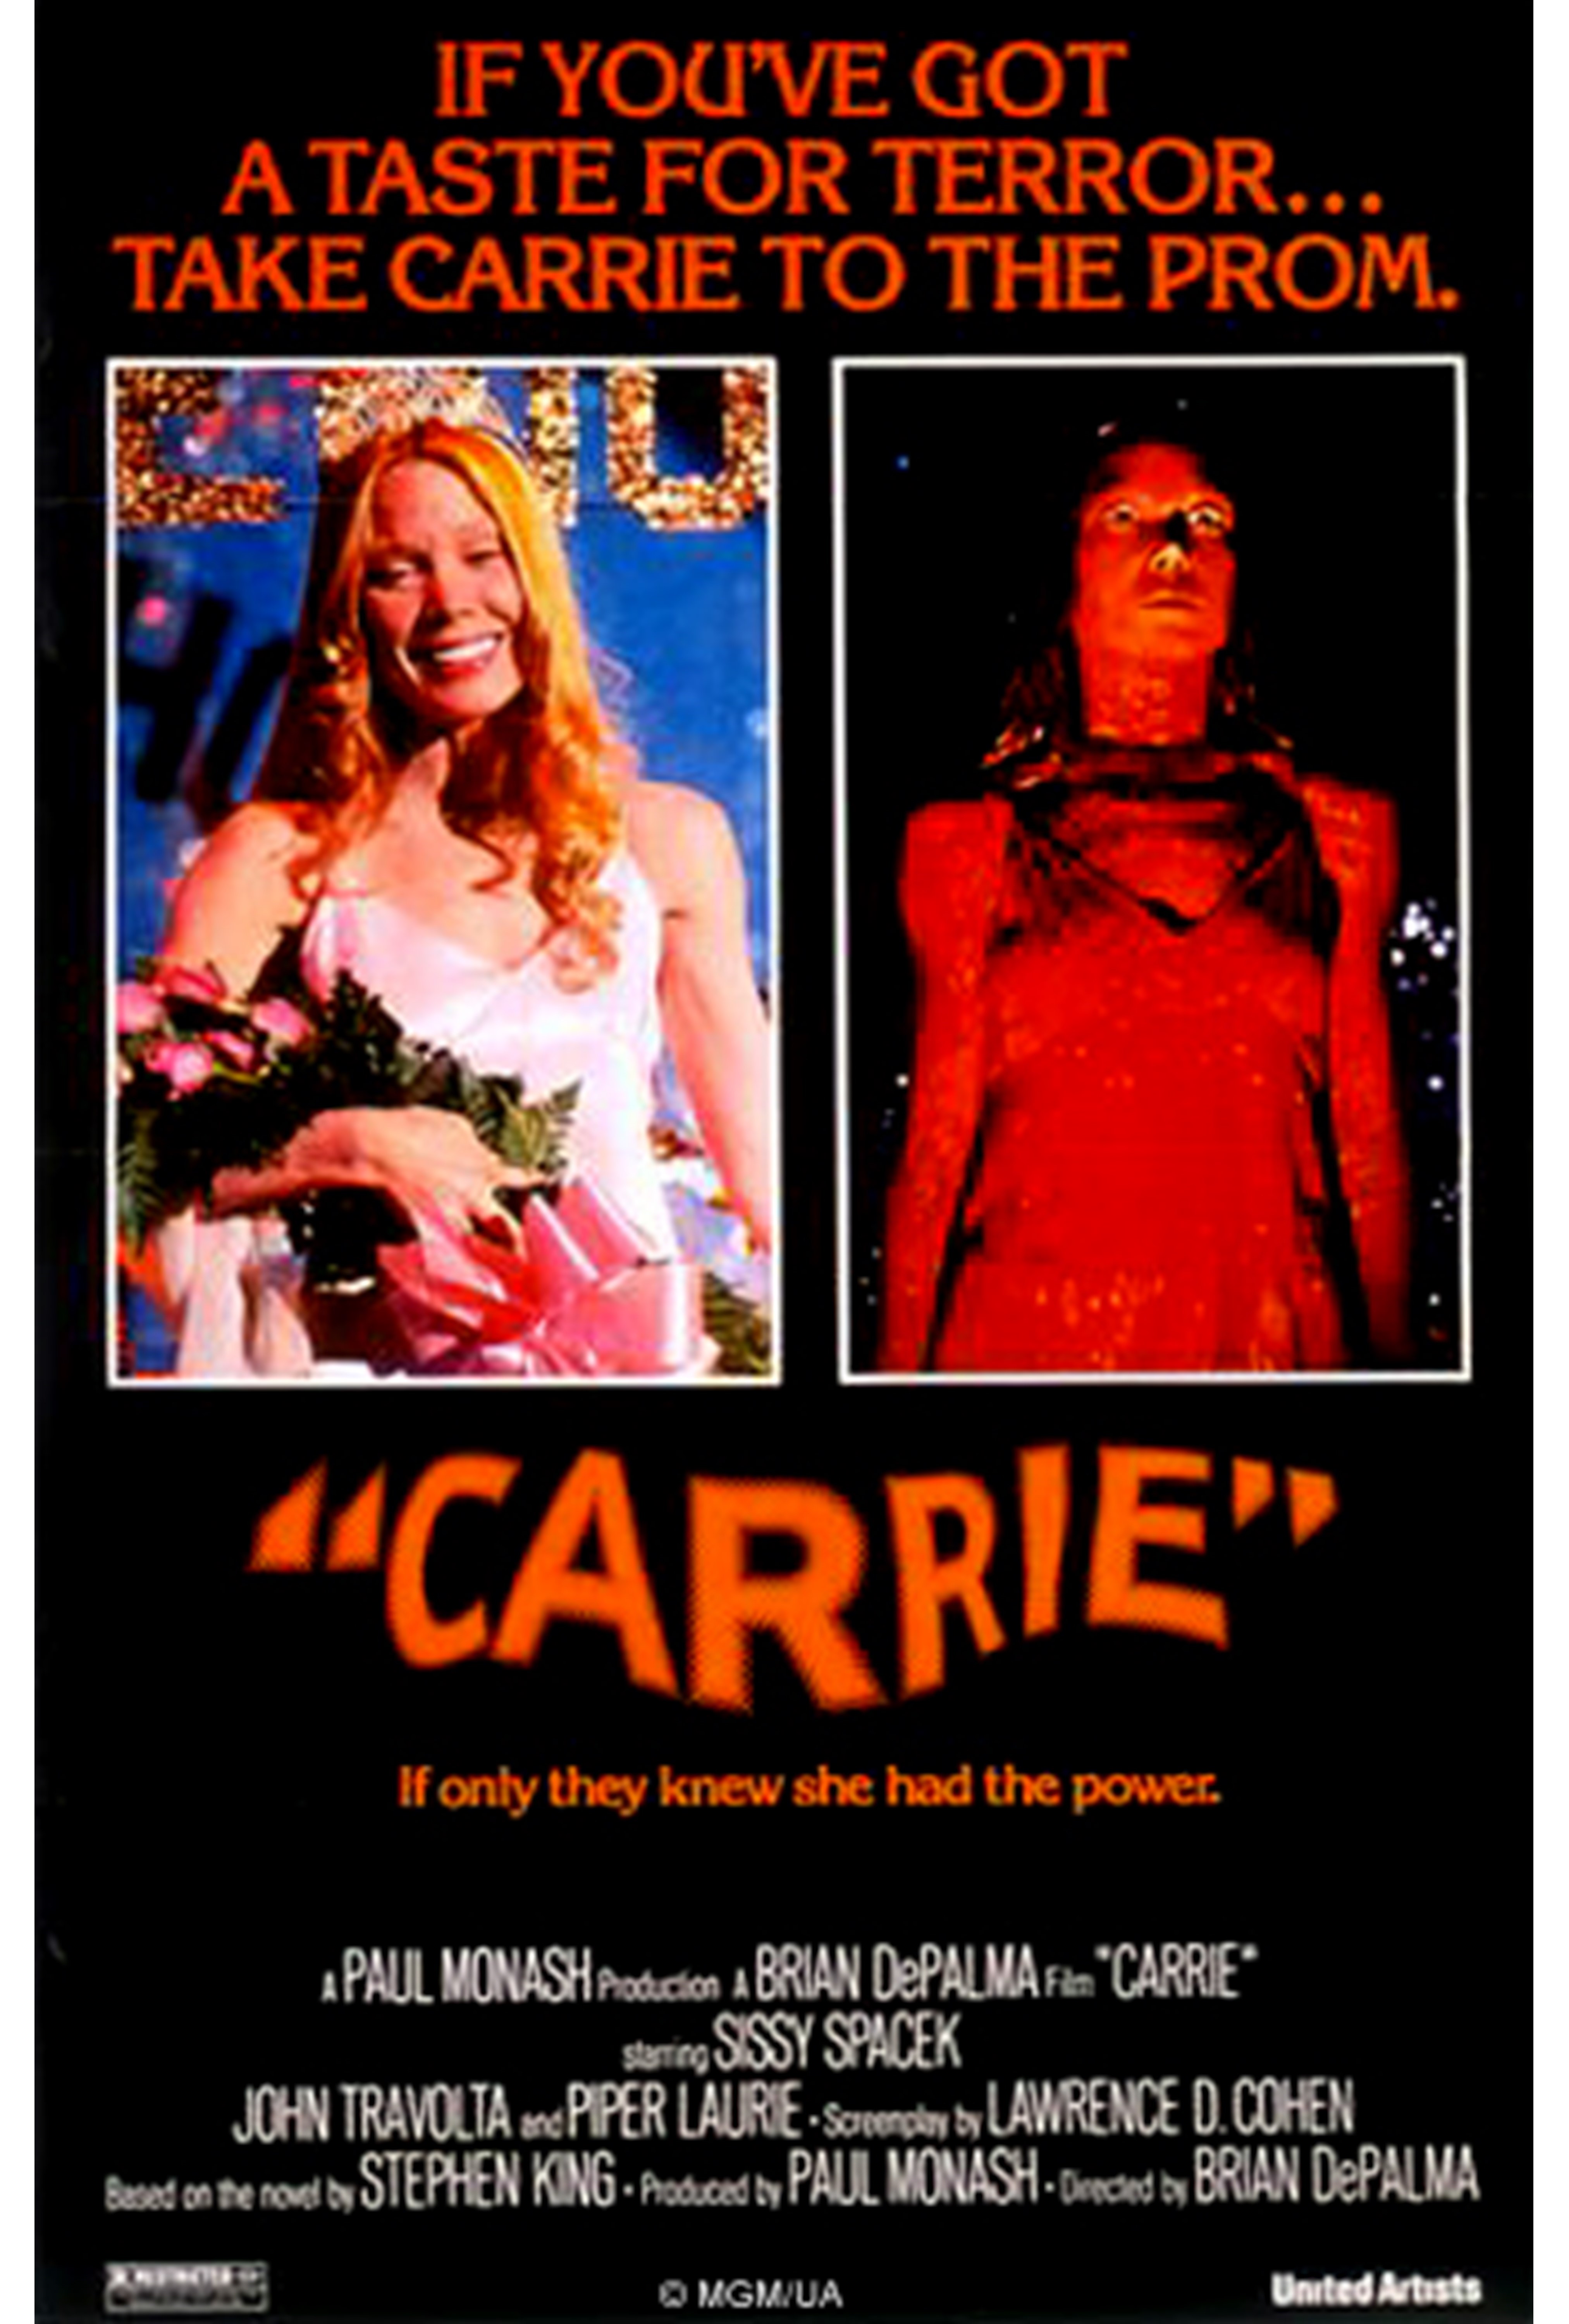 Film poster for Carrie